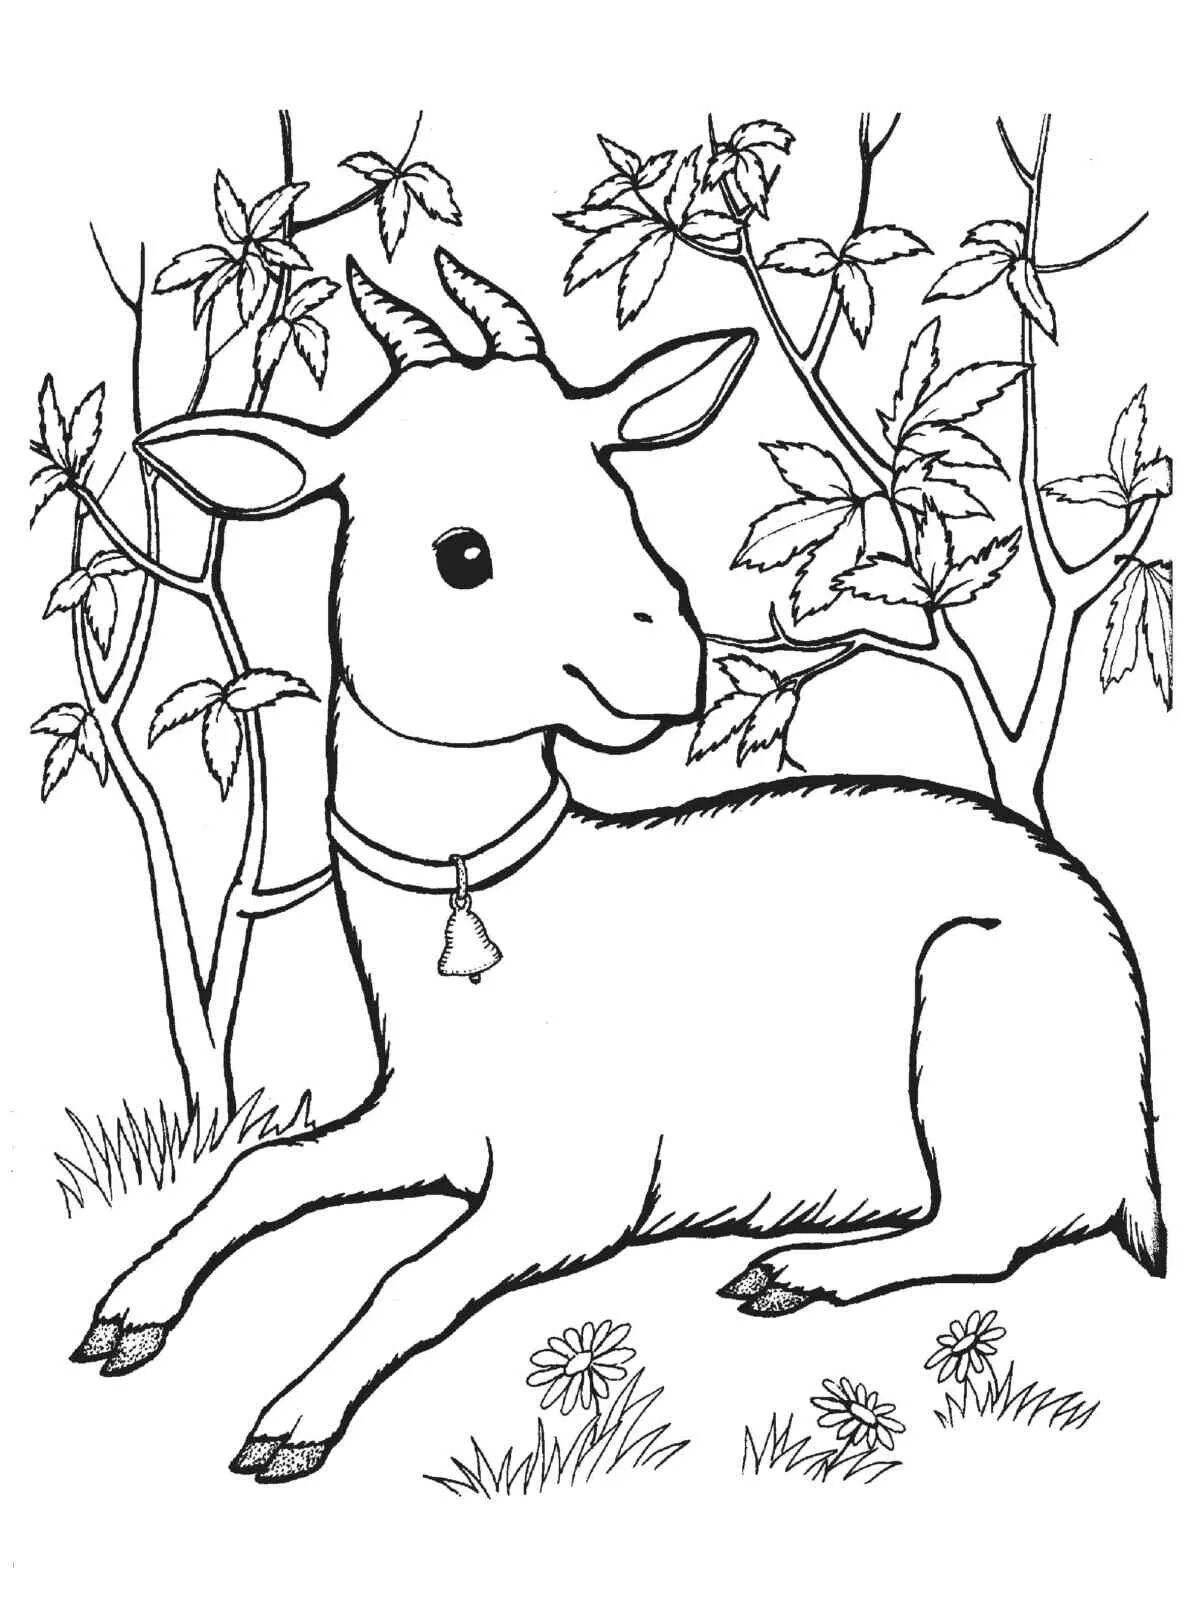 Adorable goat coloring book for kids